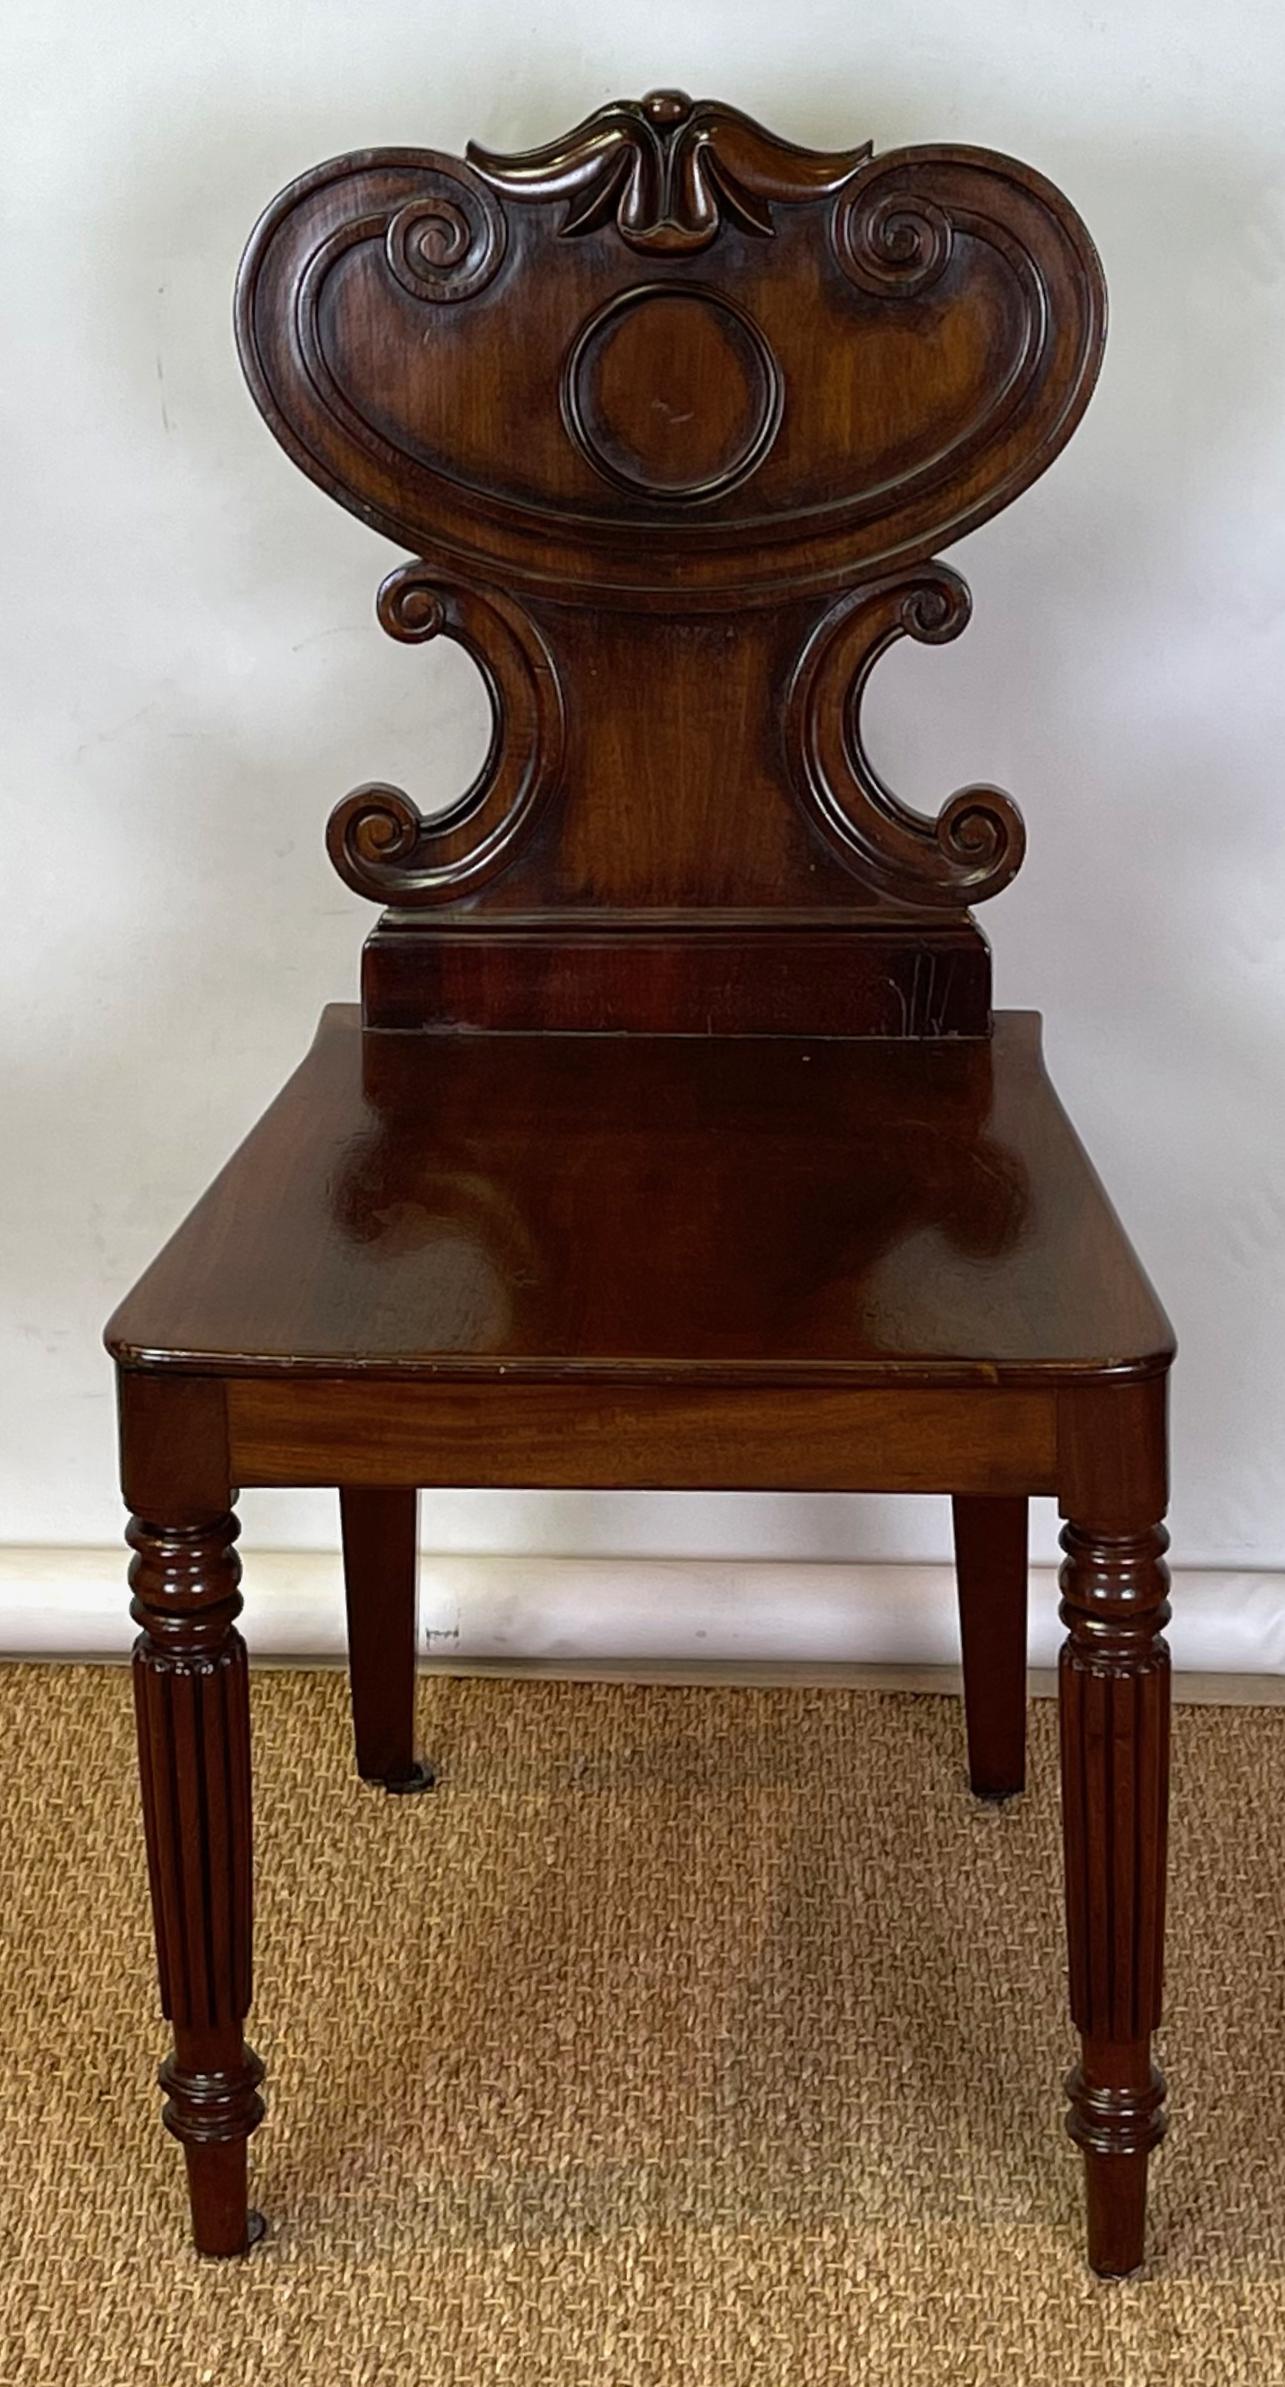 Hand-Crafted English Regency Hall Chair